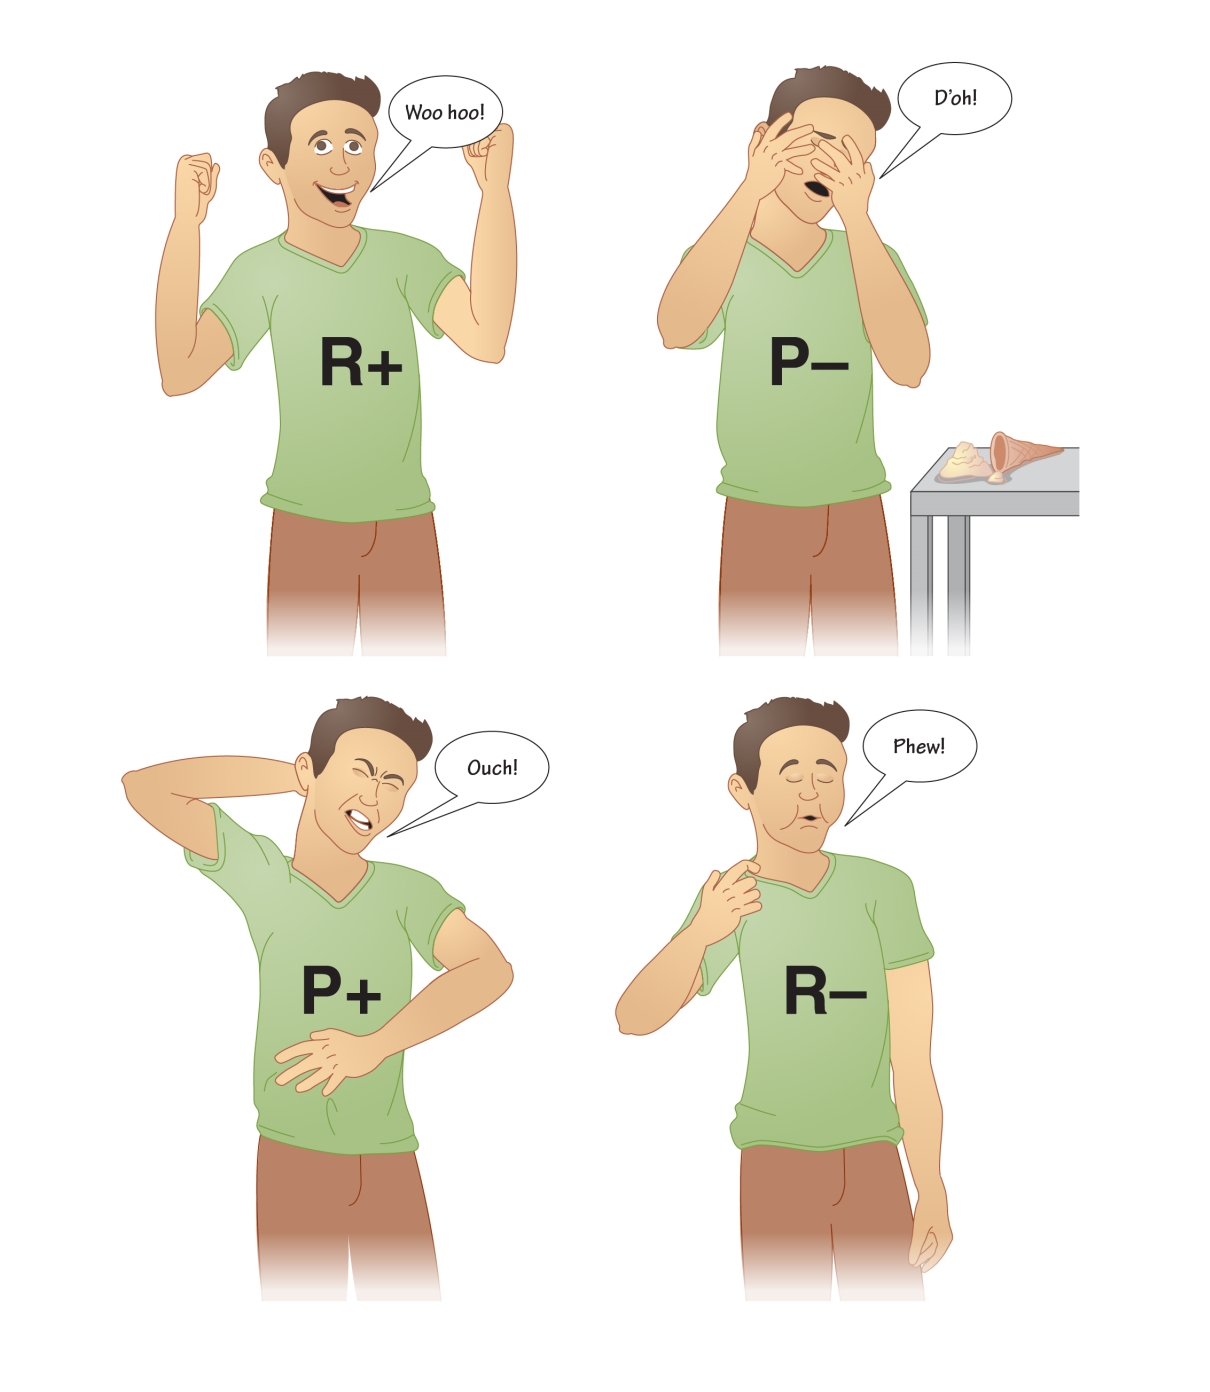 Four poses of same humorous cartoon character, each showing different emotion, each with text in speech bubble that indicates emotional state.